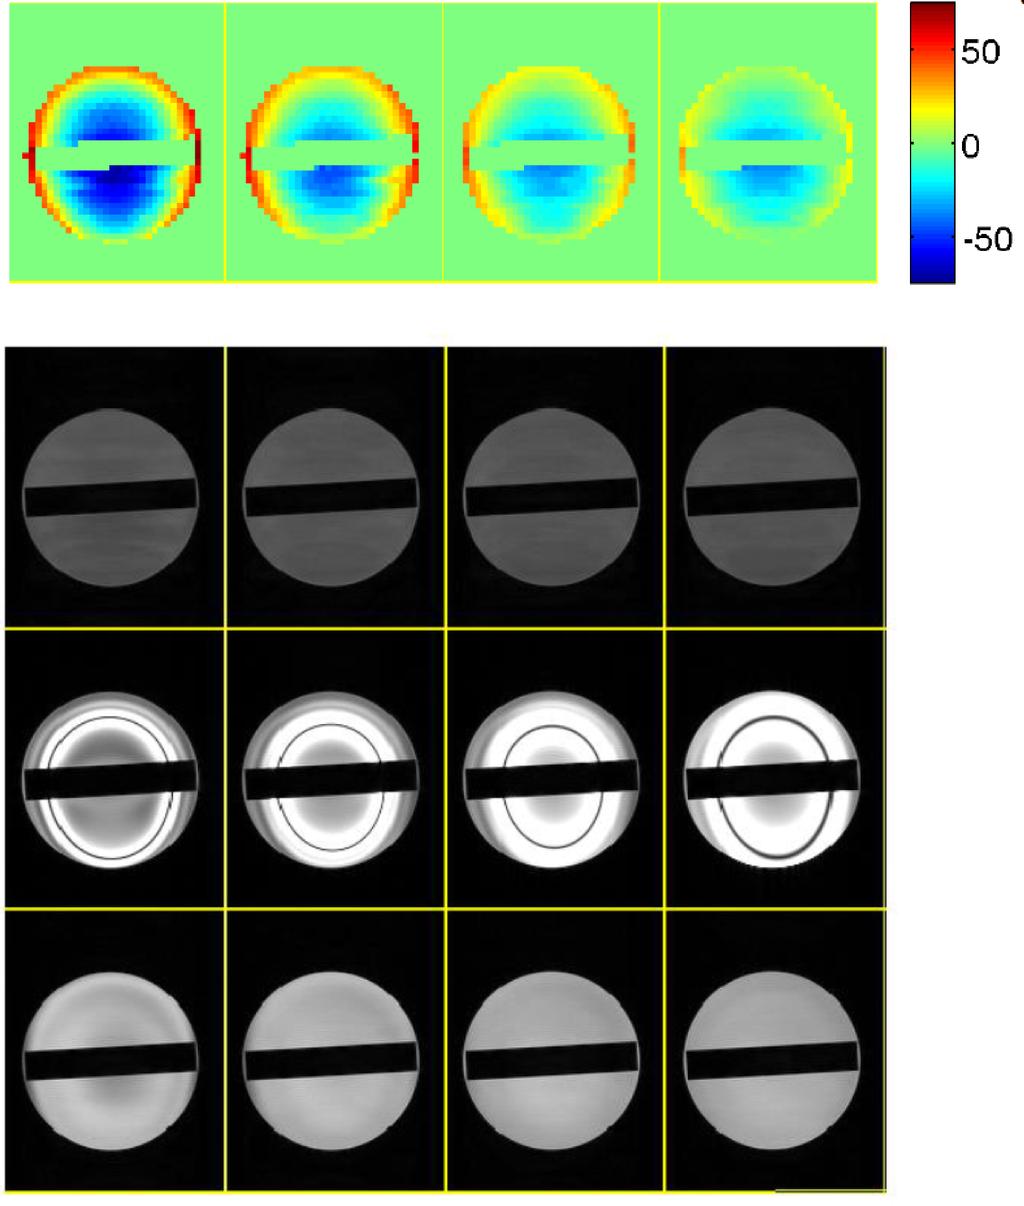 (a) (Hz) (b) SPGR bssfp spectral-stfr Figure 5.4: Comparison of SPGR, bssfp, and spectral-stfr imaging in a phantom. (a) B map. (b) Steady-state images, displayed on a common grayscale.